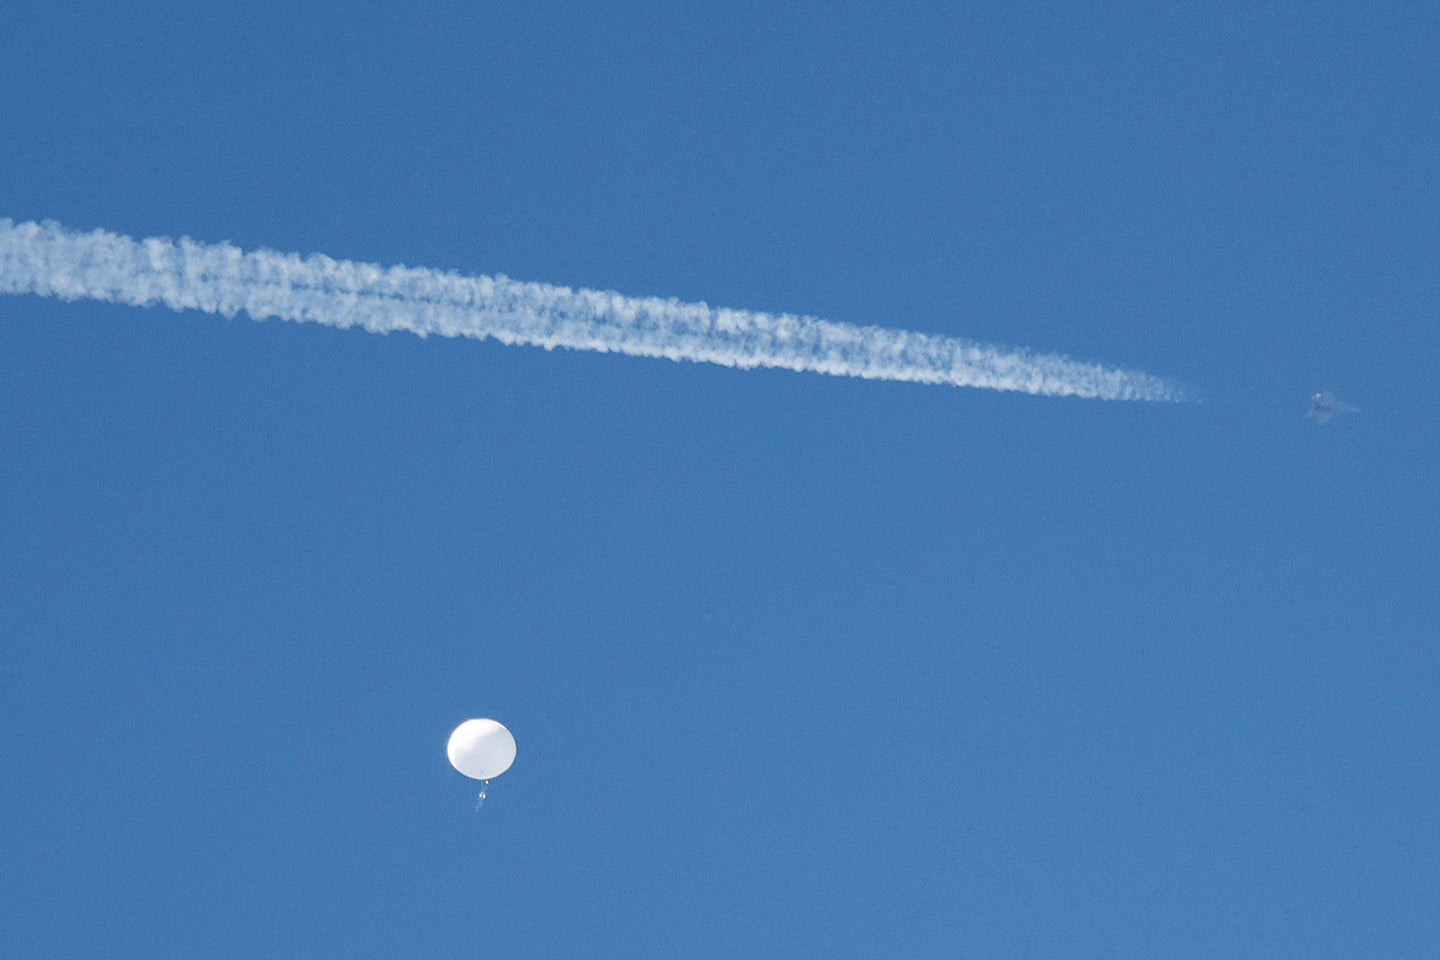 A big balloon in the sky, with a vapor trail from a jet speeding by.